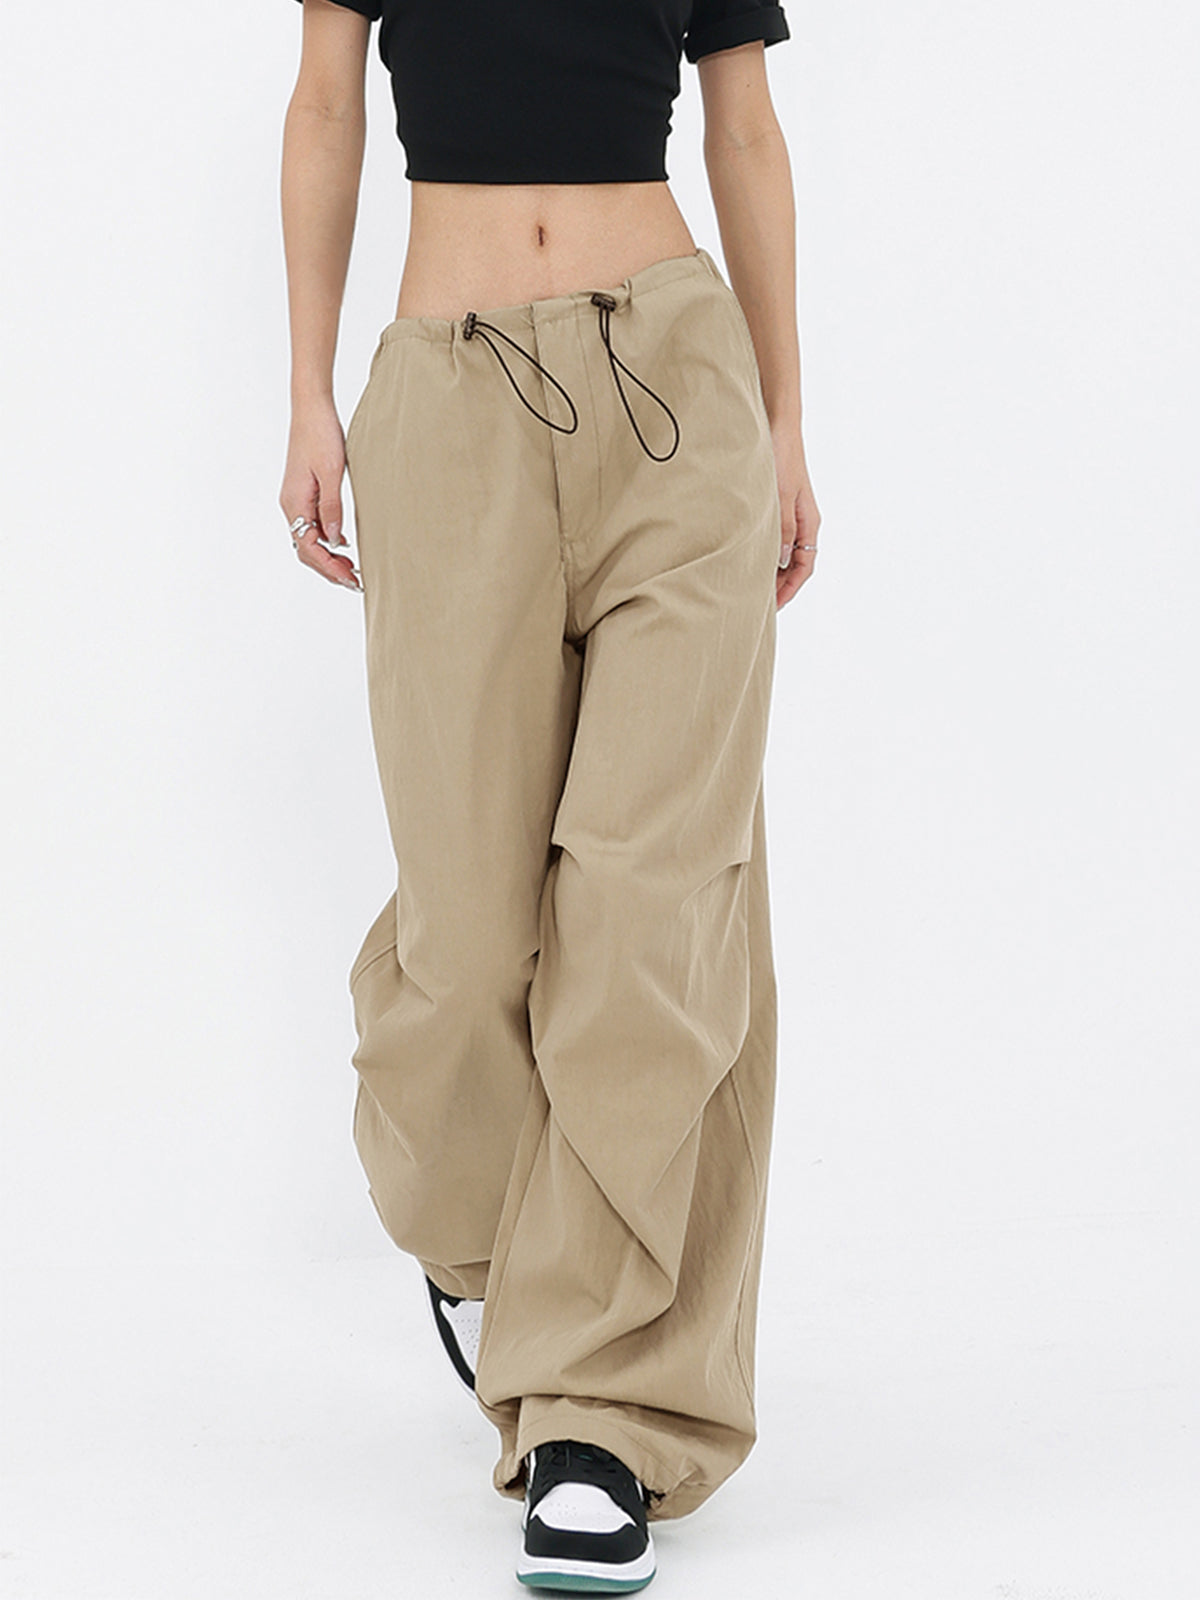 Flying Solo Cargo Parachute Pants